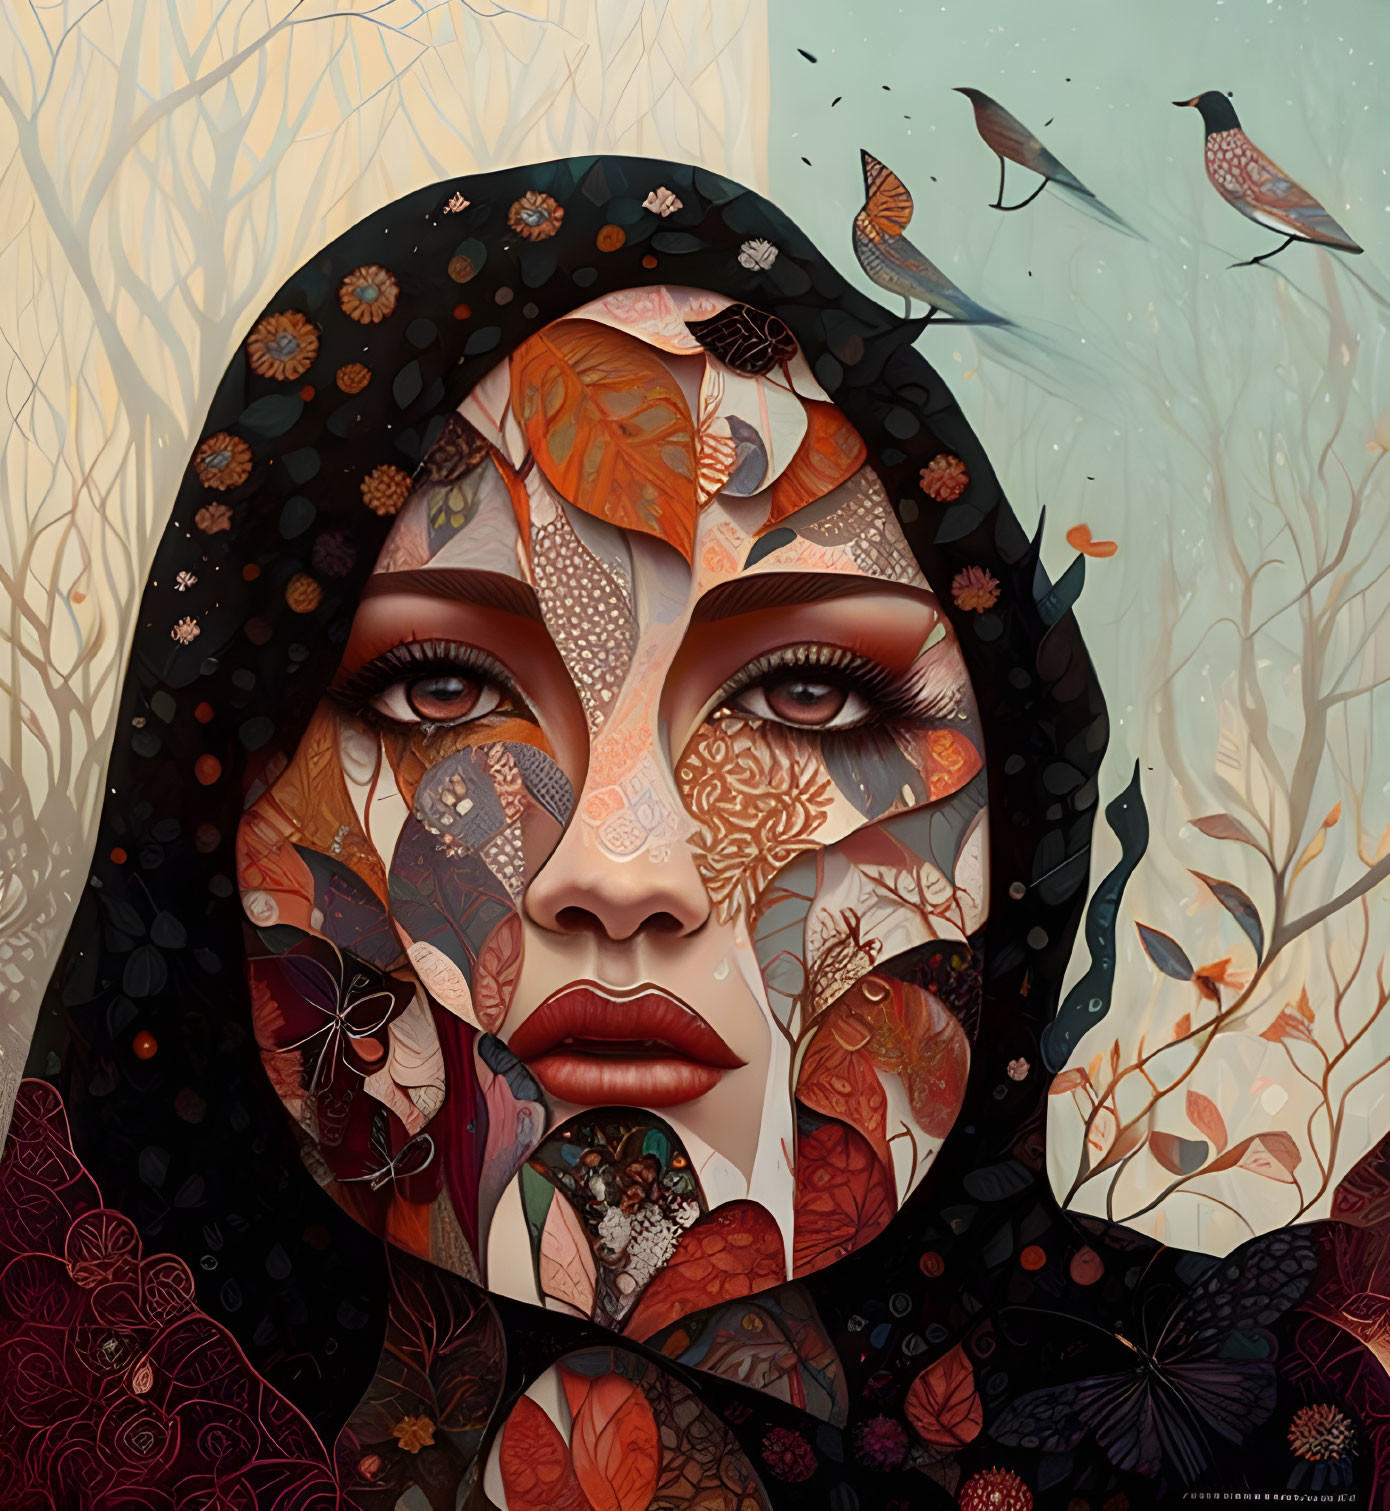 Illustration: Woman's face merges with nature elements like autumn leaves, butterflies, and birds on neutral